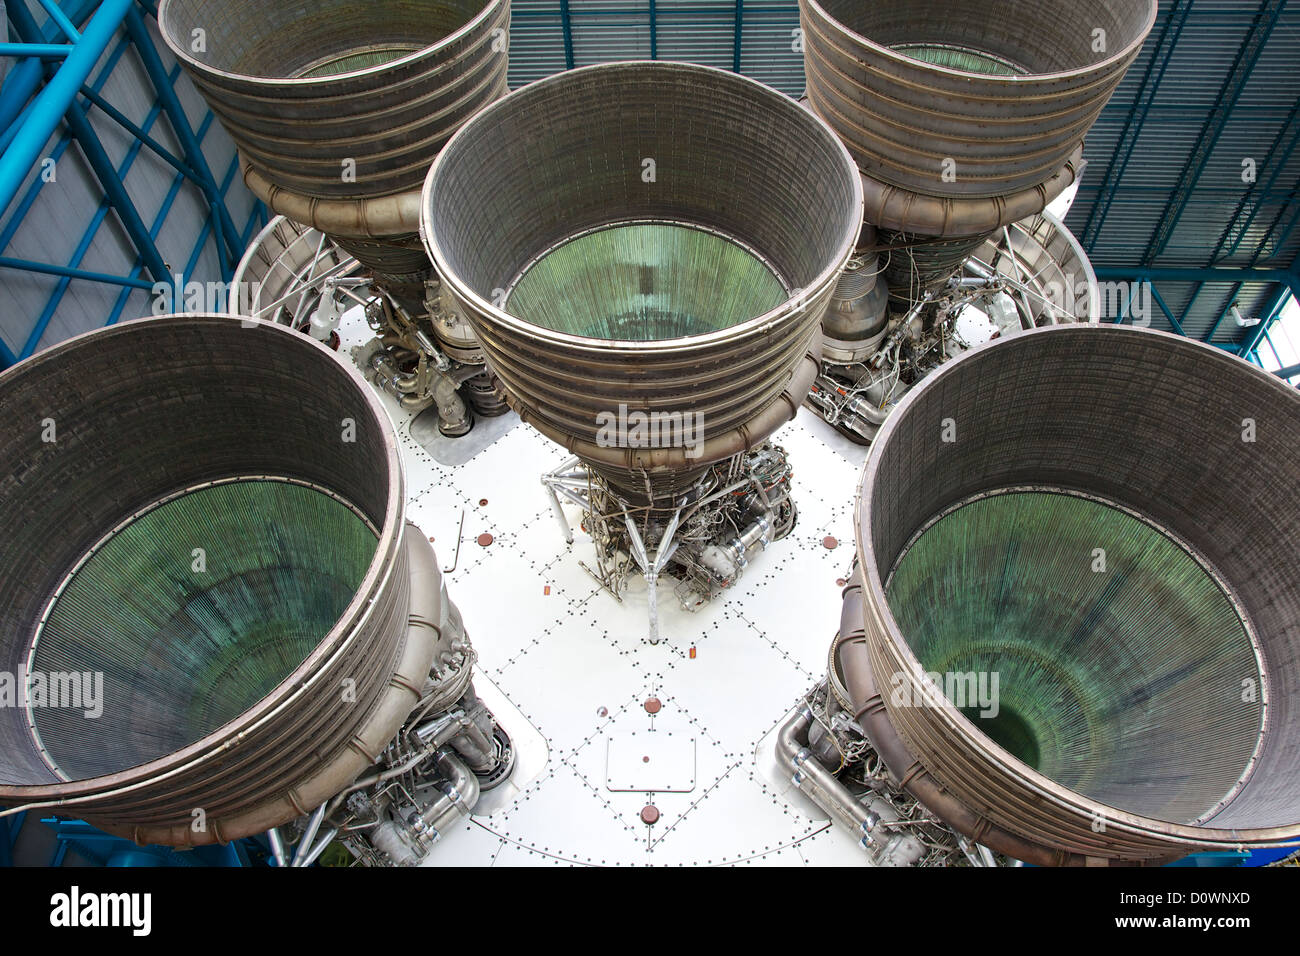 Saturn V rocket engines at the Kennedy Space Center in Florida Stock Photo